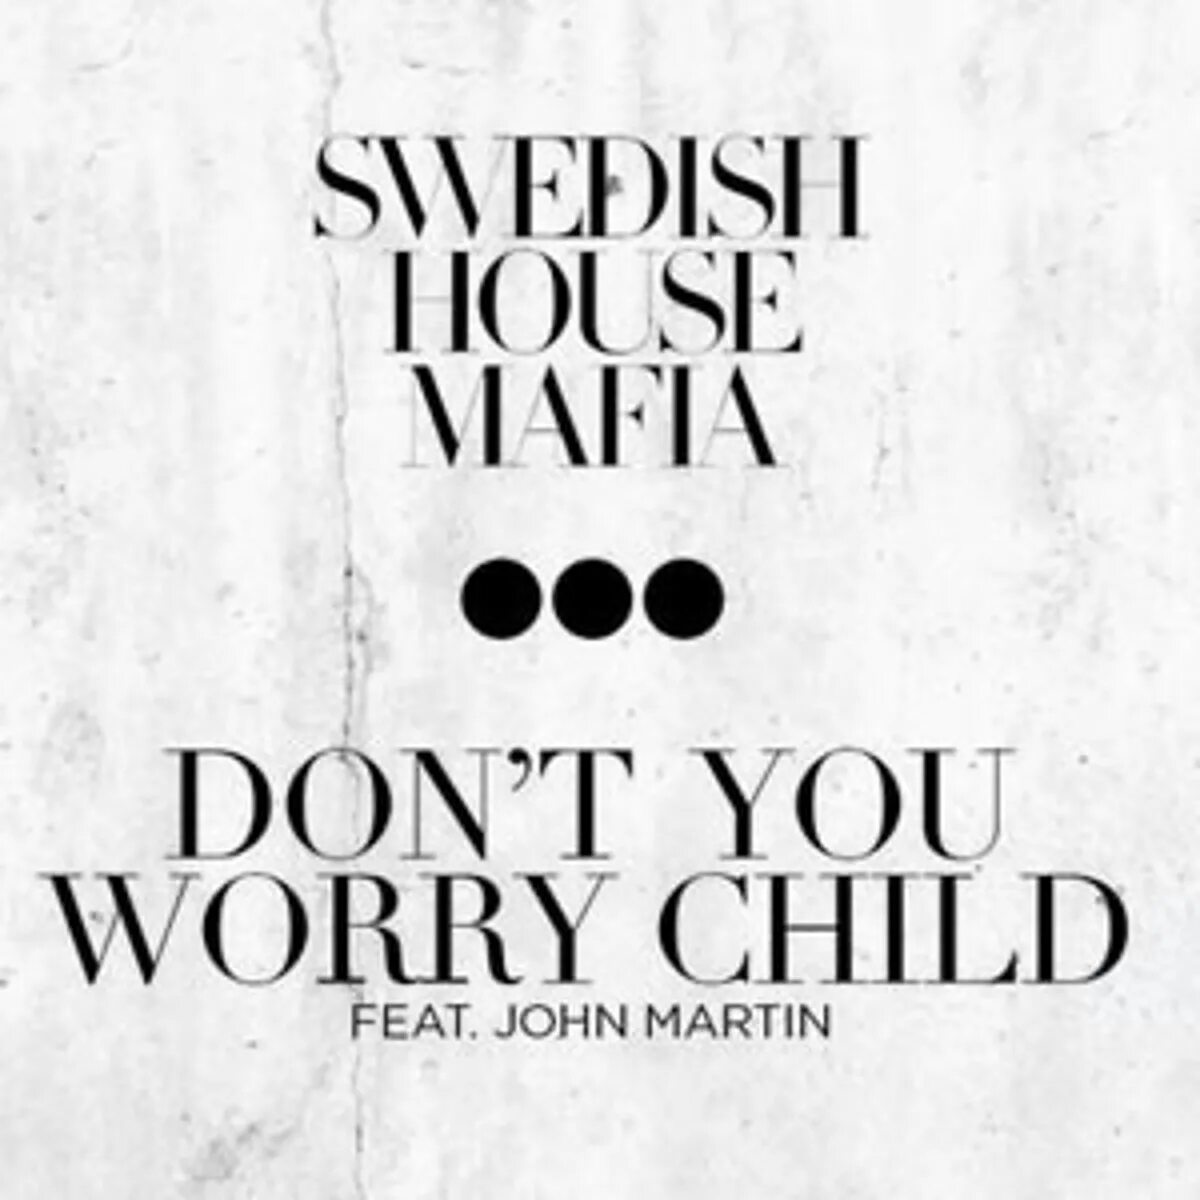 Dont feat. Swedish House Mafia don't you worry child. Swedish House Mafia ft. John Martin don't you worry child (Remixes). Swedish House Mafia. Swedish House Mafia - don't you worry child (Acoustic Version).